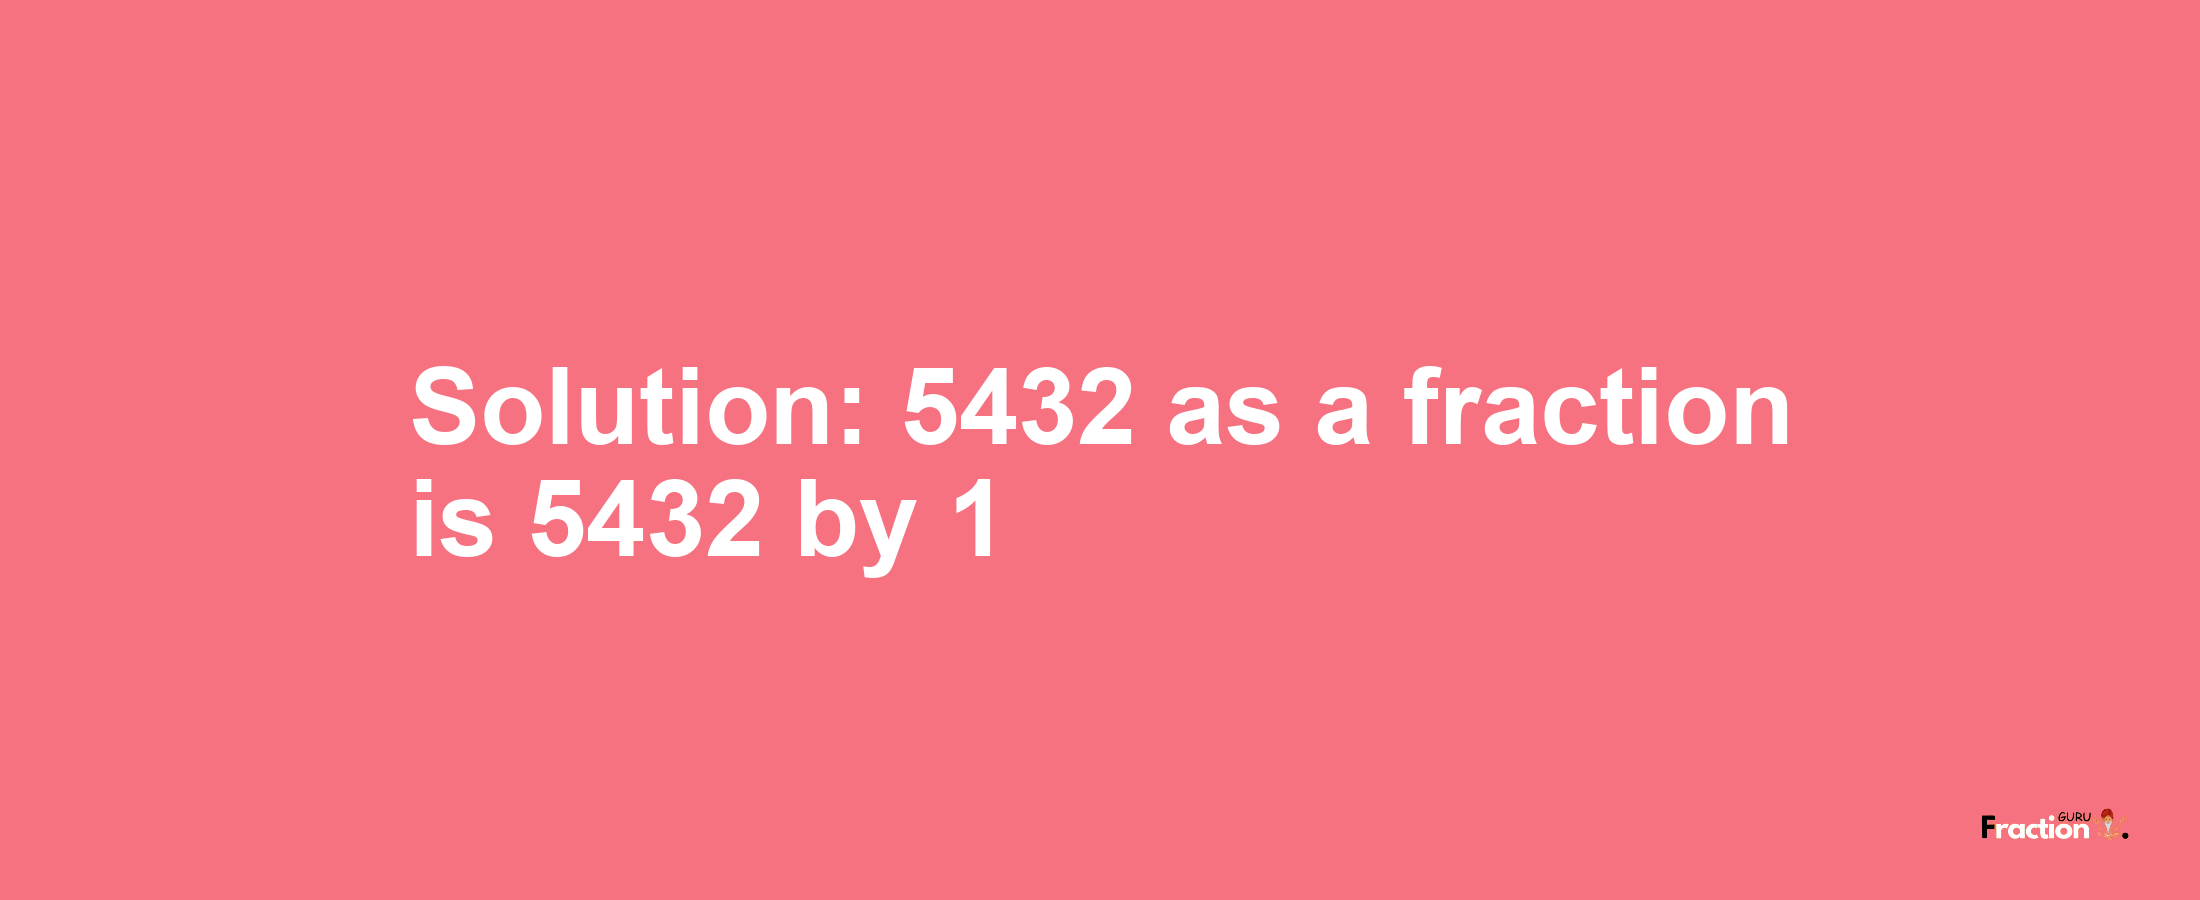 Solution:5432 as a fraction is 5432/1